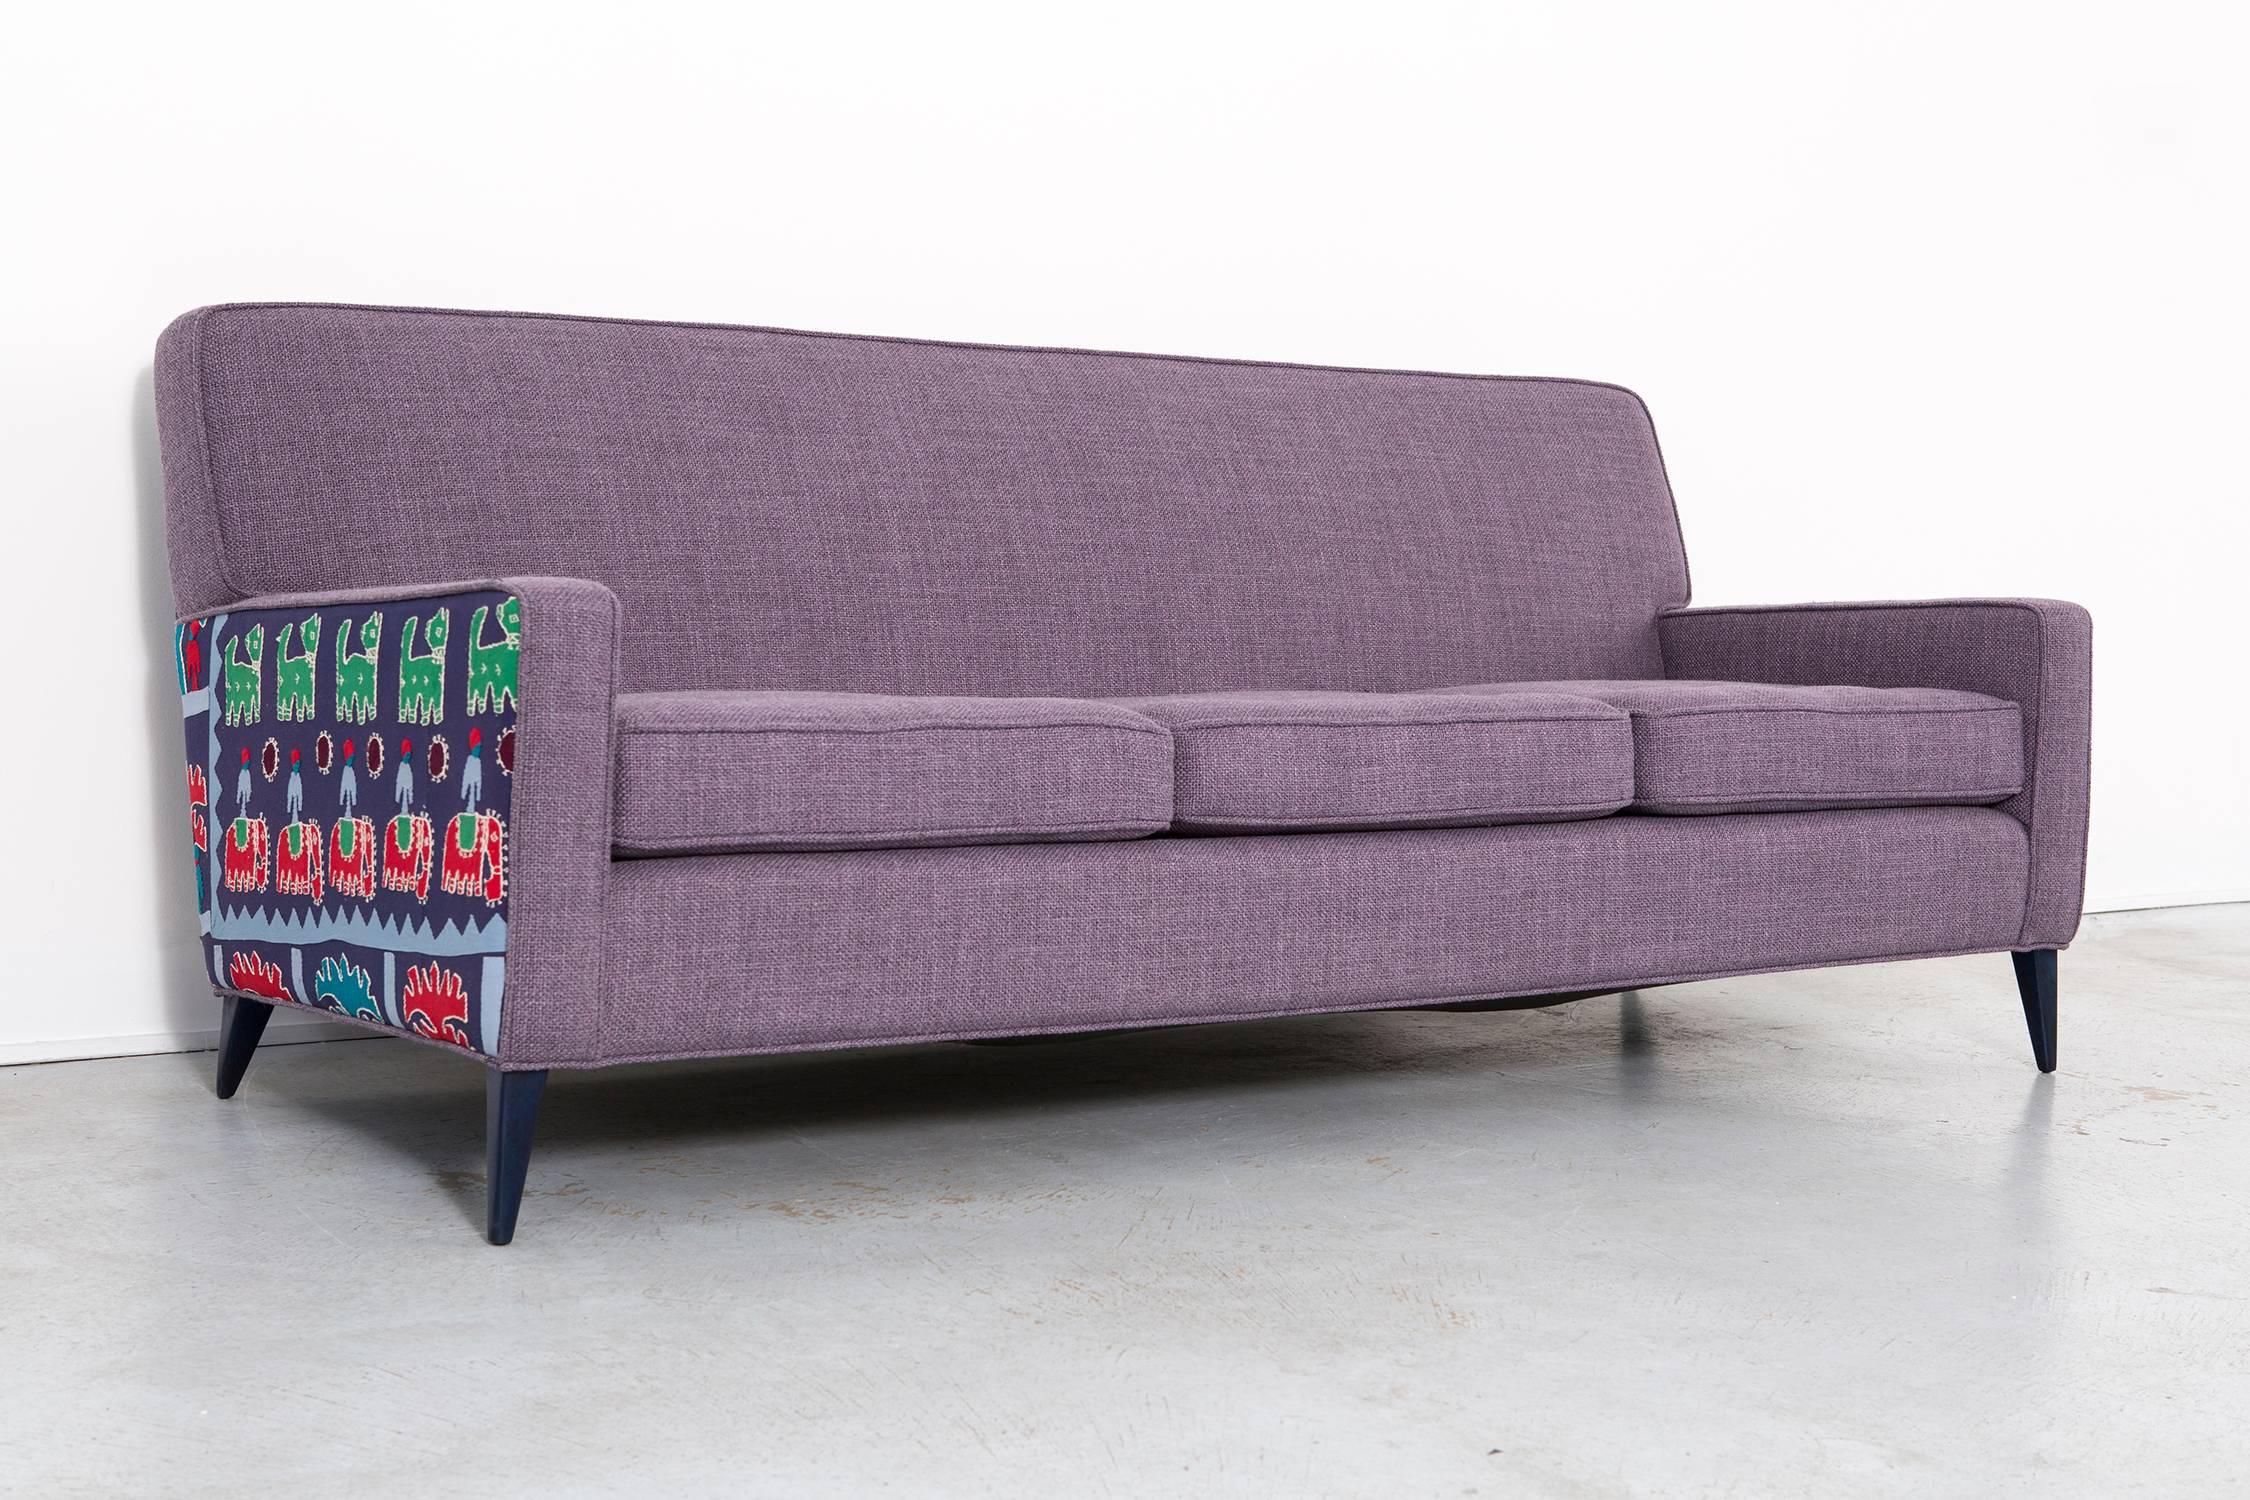 Mid-Century Modern Paul McCobb Sofa Reupholstered in Maharam Cotton + 1940s Indian Cloth